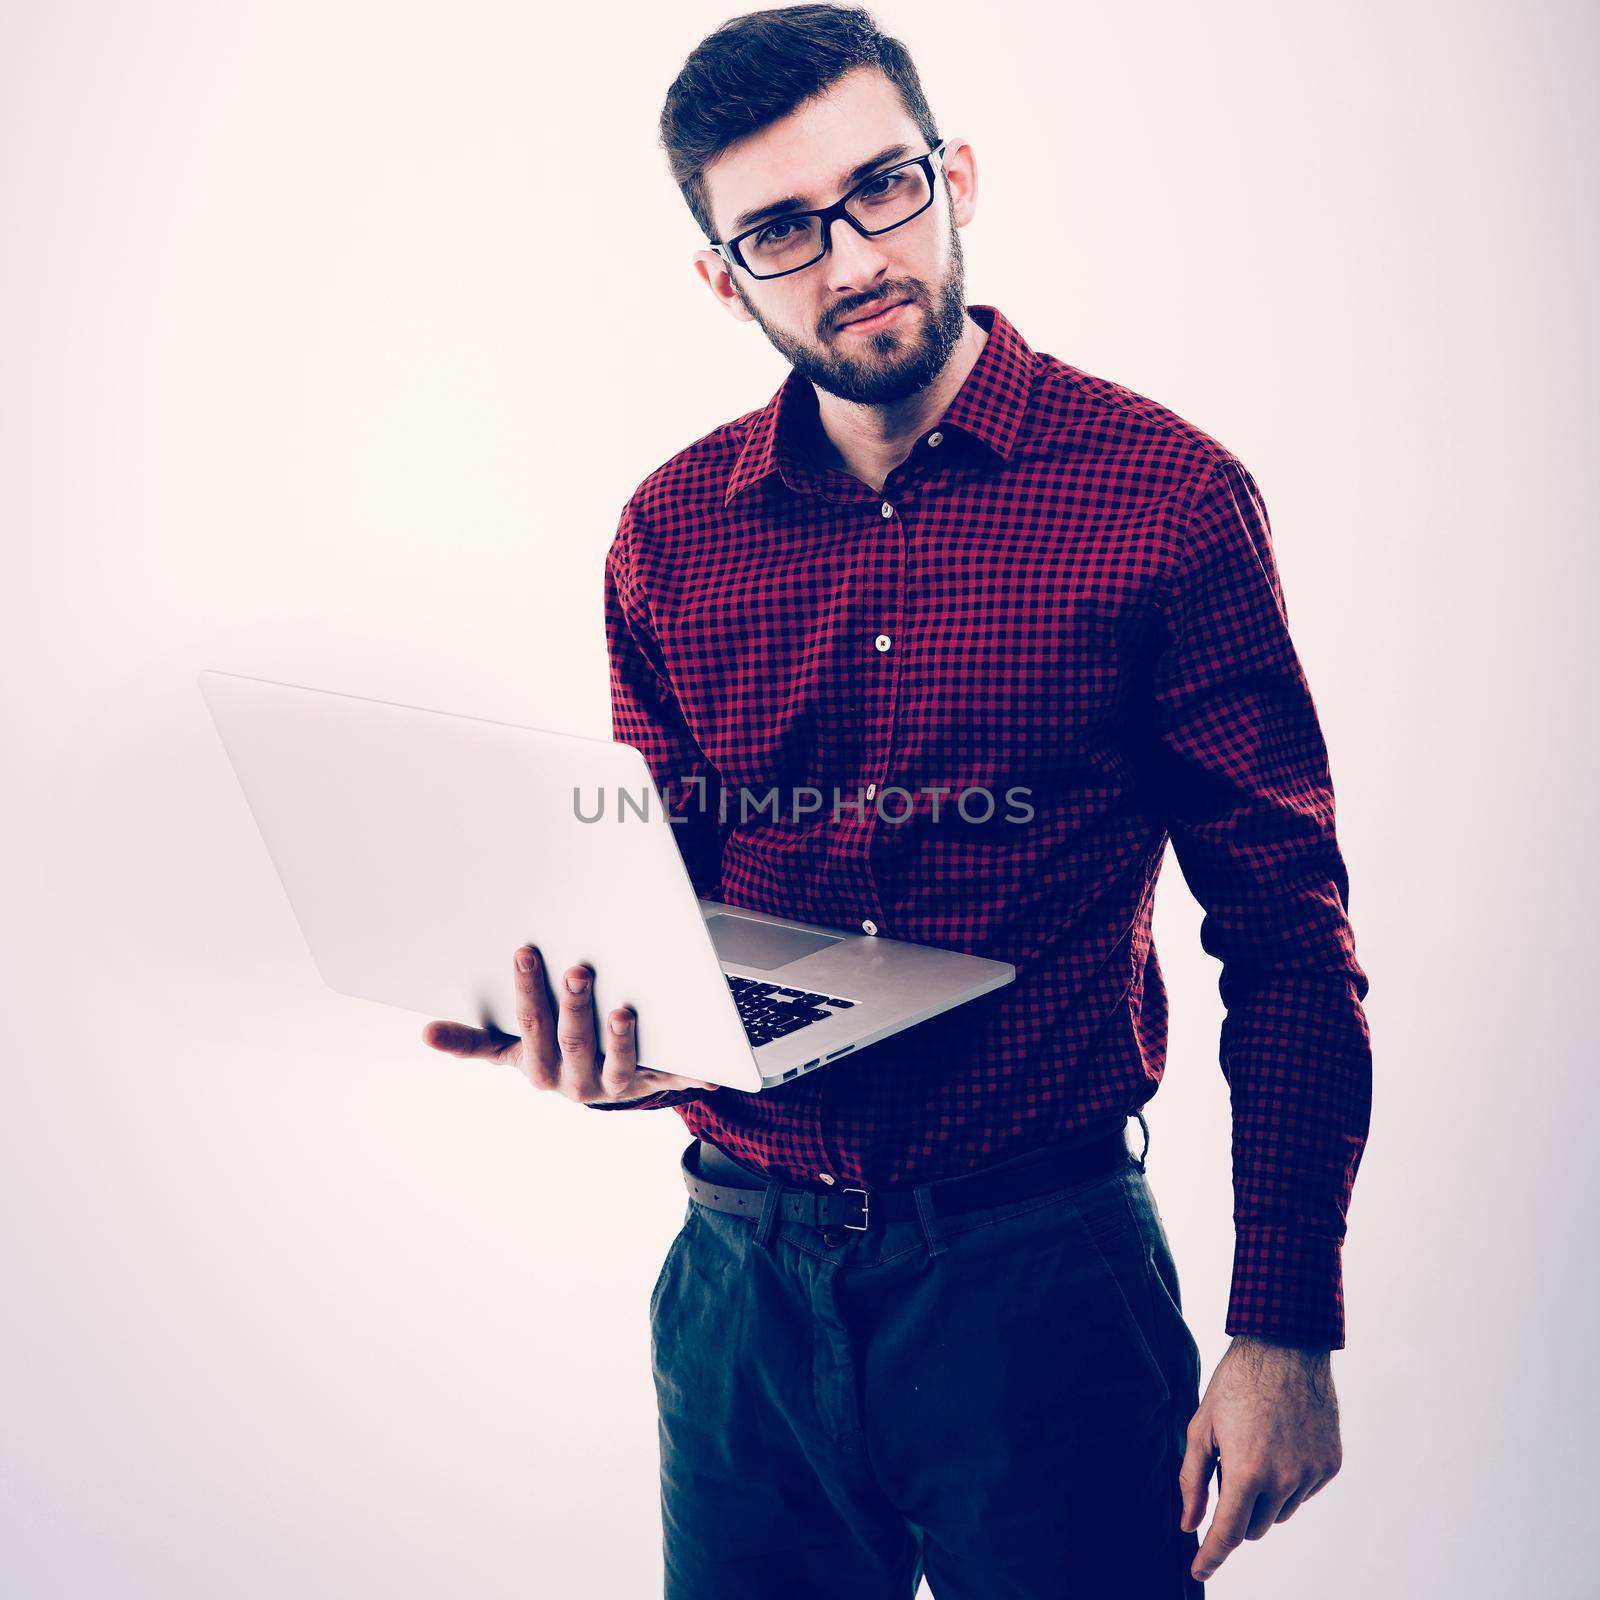 system administrator with a laptop against white background by SmartPhotoLab